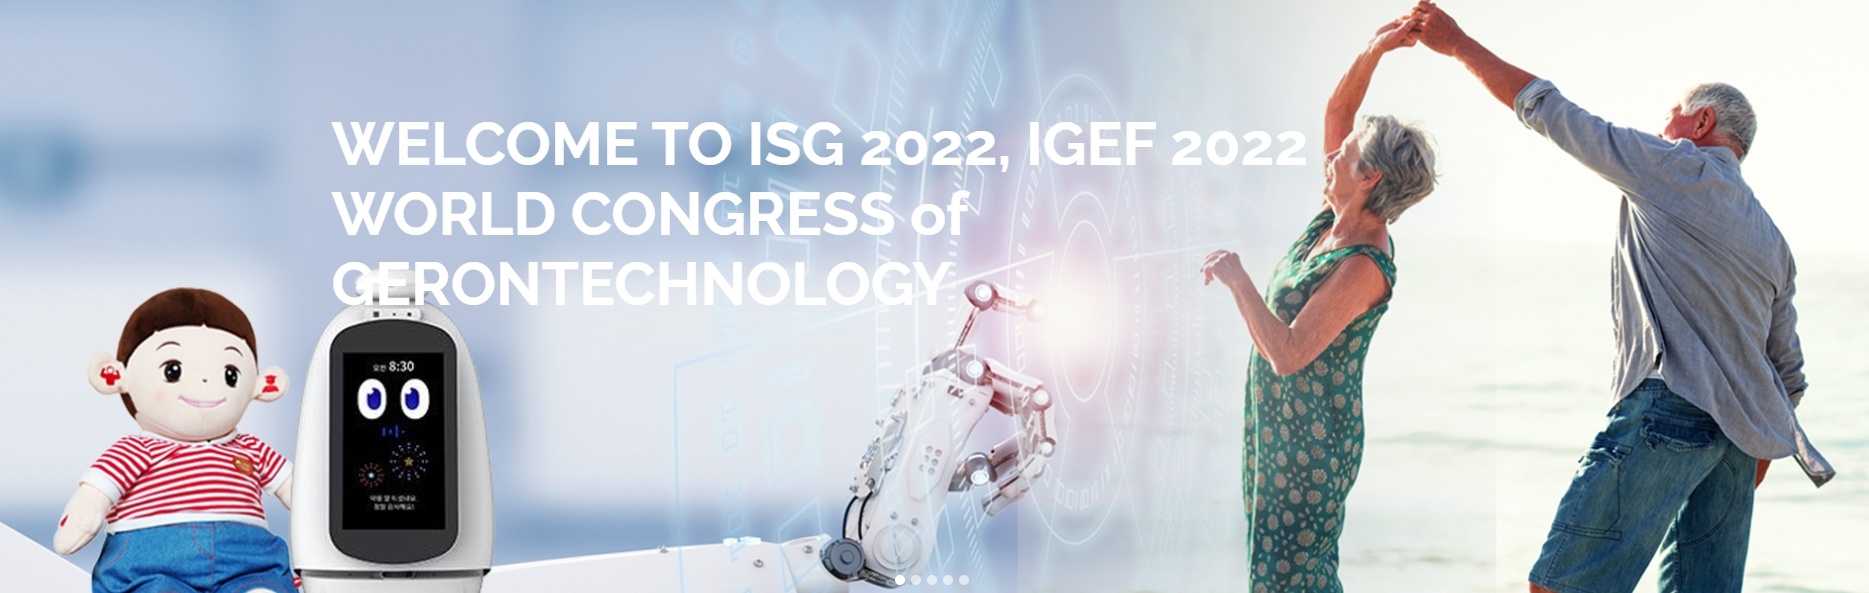 2022 ISG Conference logo